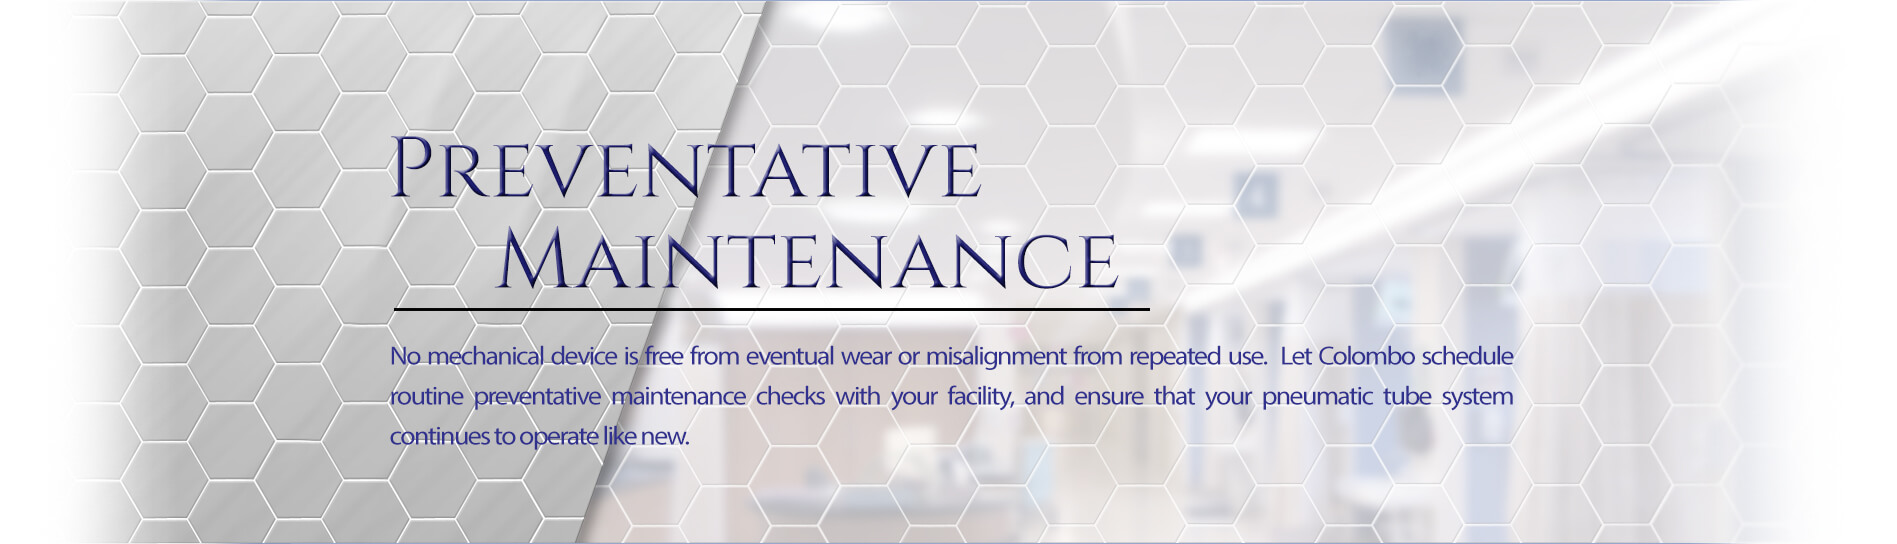 Colombo Pneumatic Tube Systems - Preventative Maintenance - No mechanical device is free from eventual wear or misalignment from repeated use. Let Colombo schedule a routine preventative maintenance check with your facility, and ensure that your pneumatic tube system continues to operate like new.